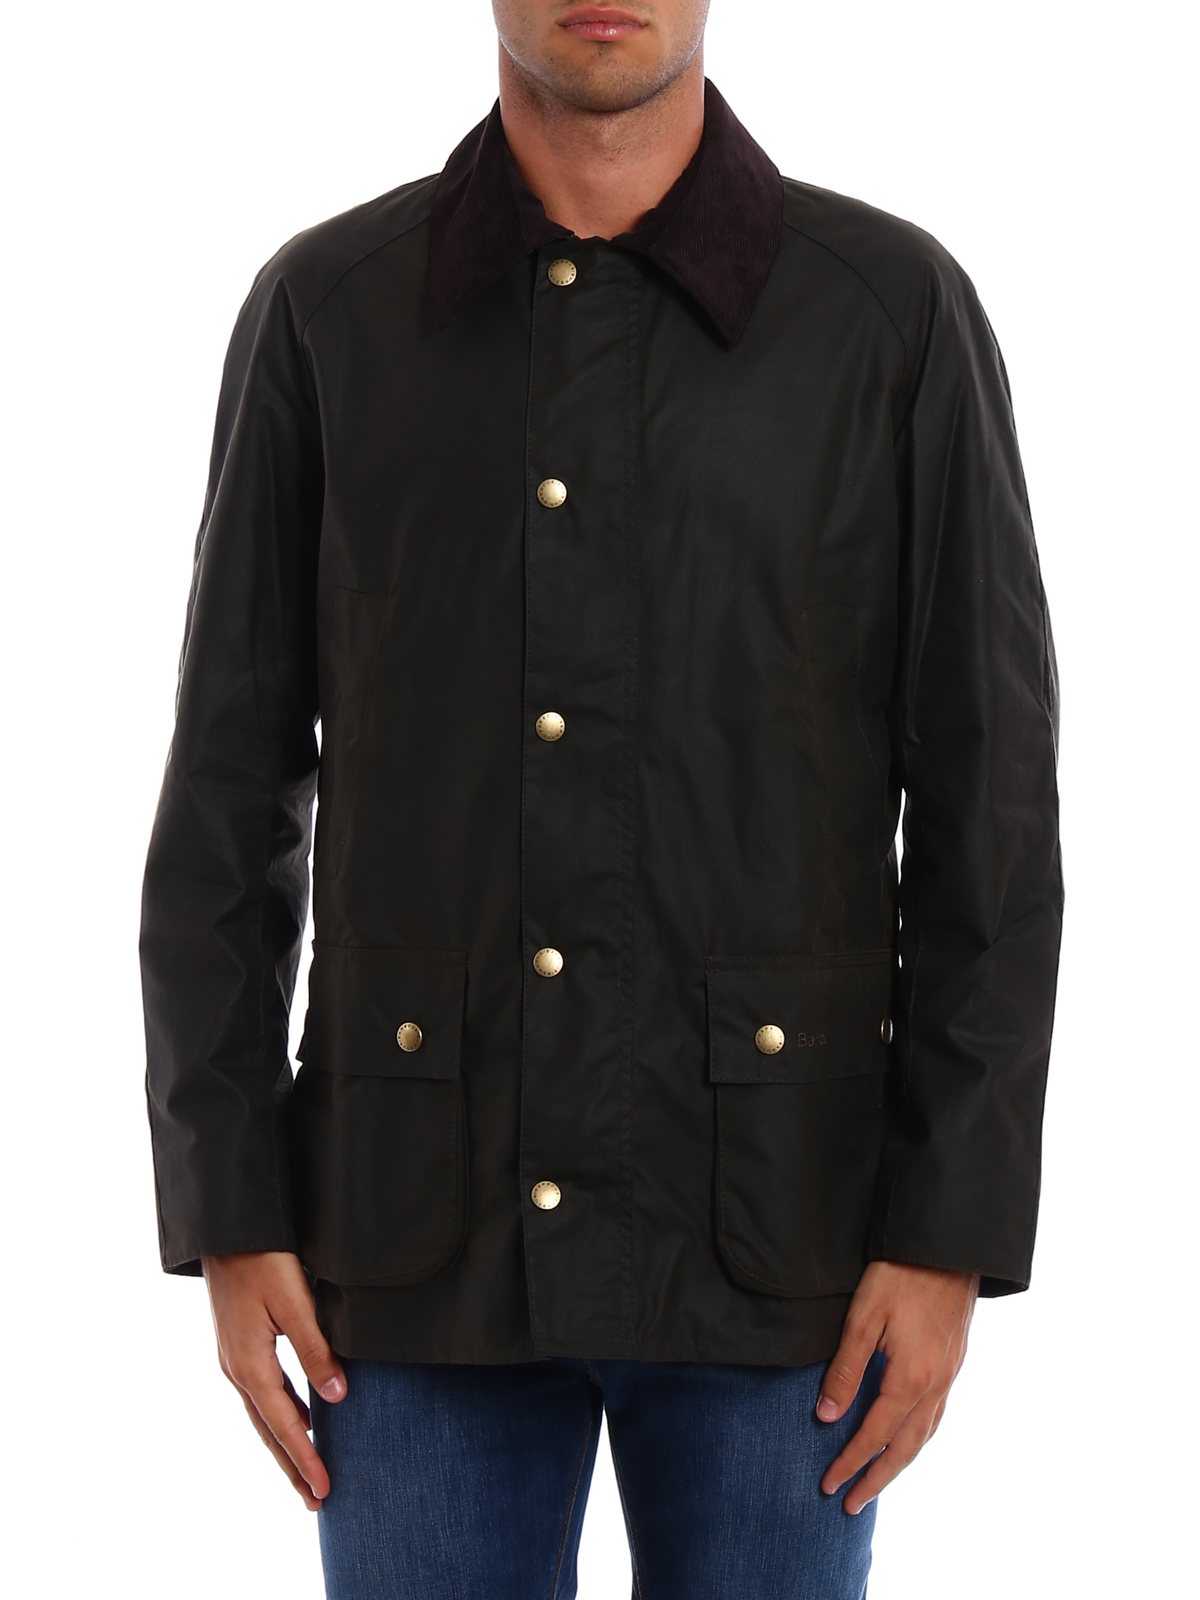 Casual jackets Barbour - Ashby wax cotton jacket - BACPS0819OL71